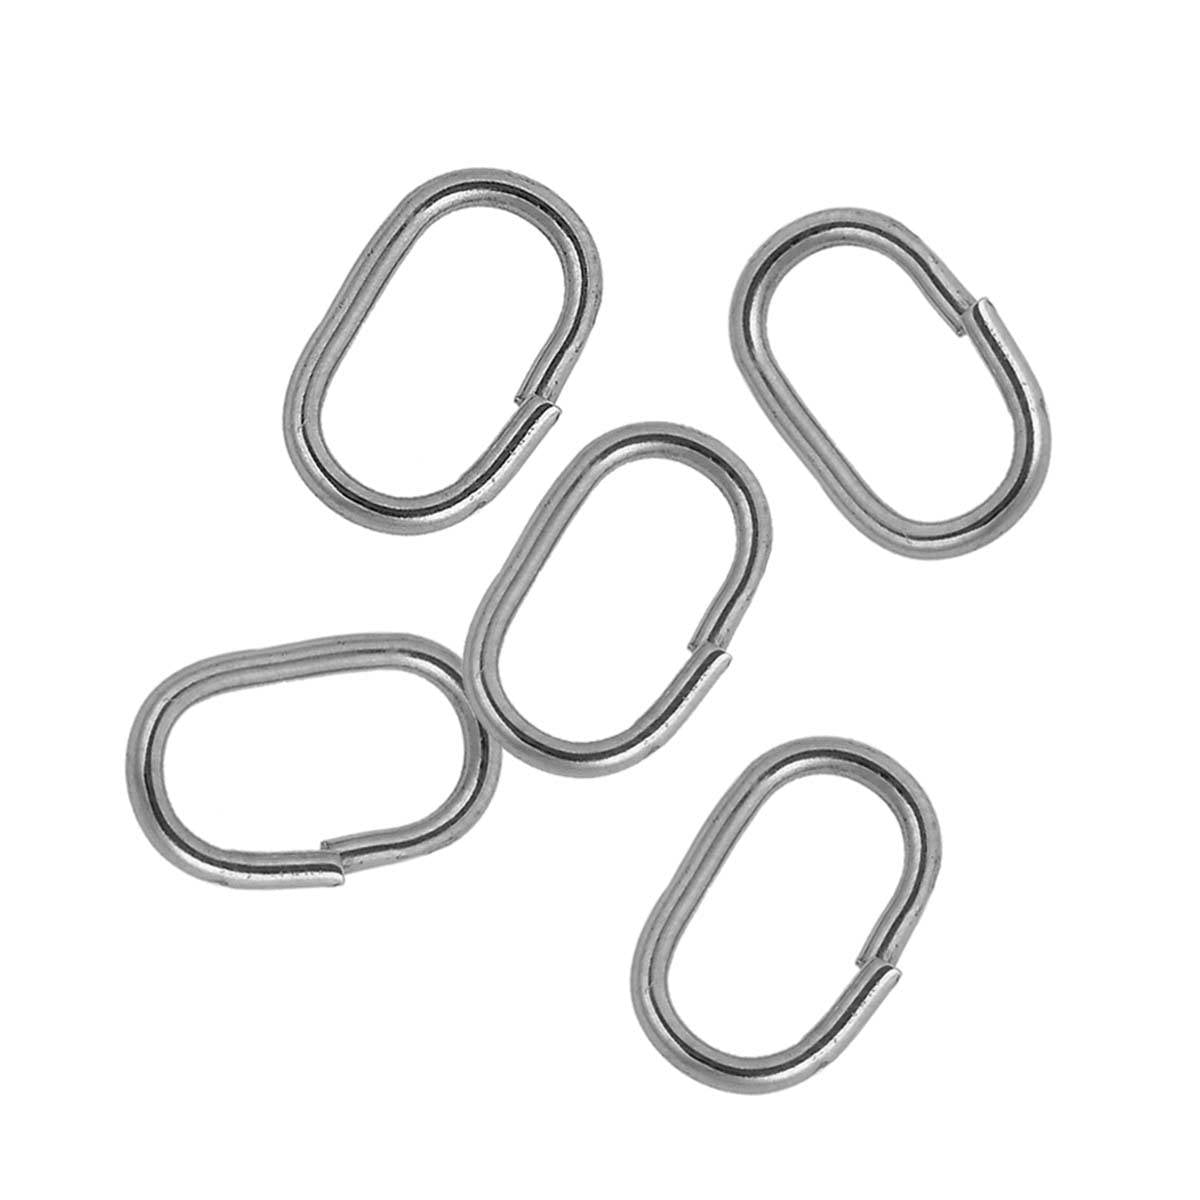 100pcs/lot 1mm Thick Stainless Steel Open Jump Rings Strong Split